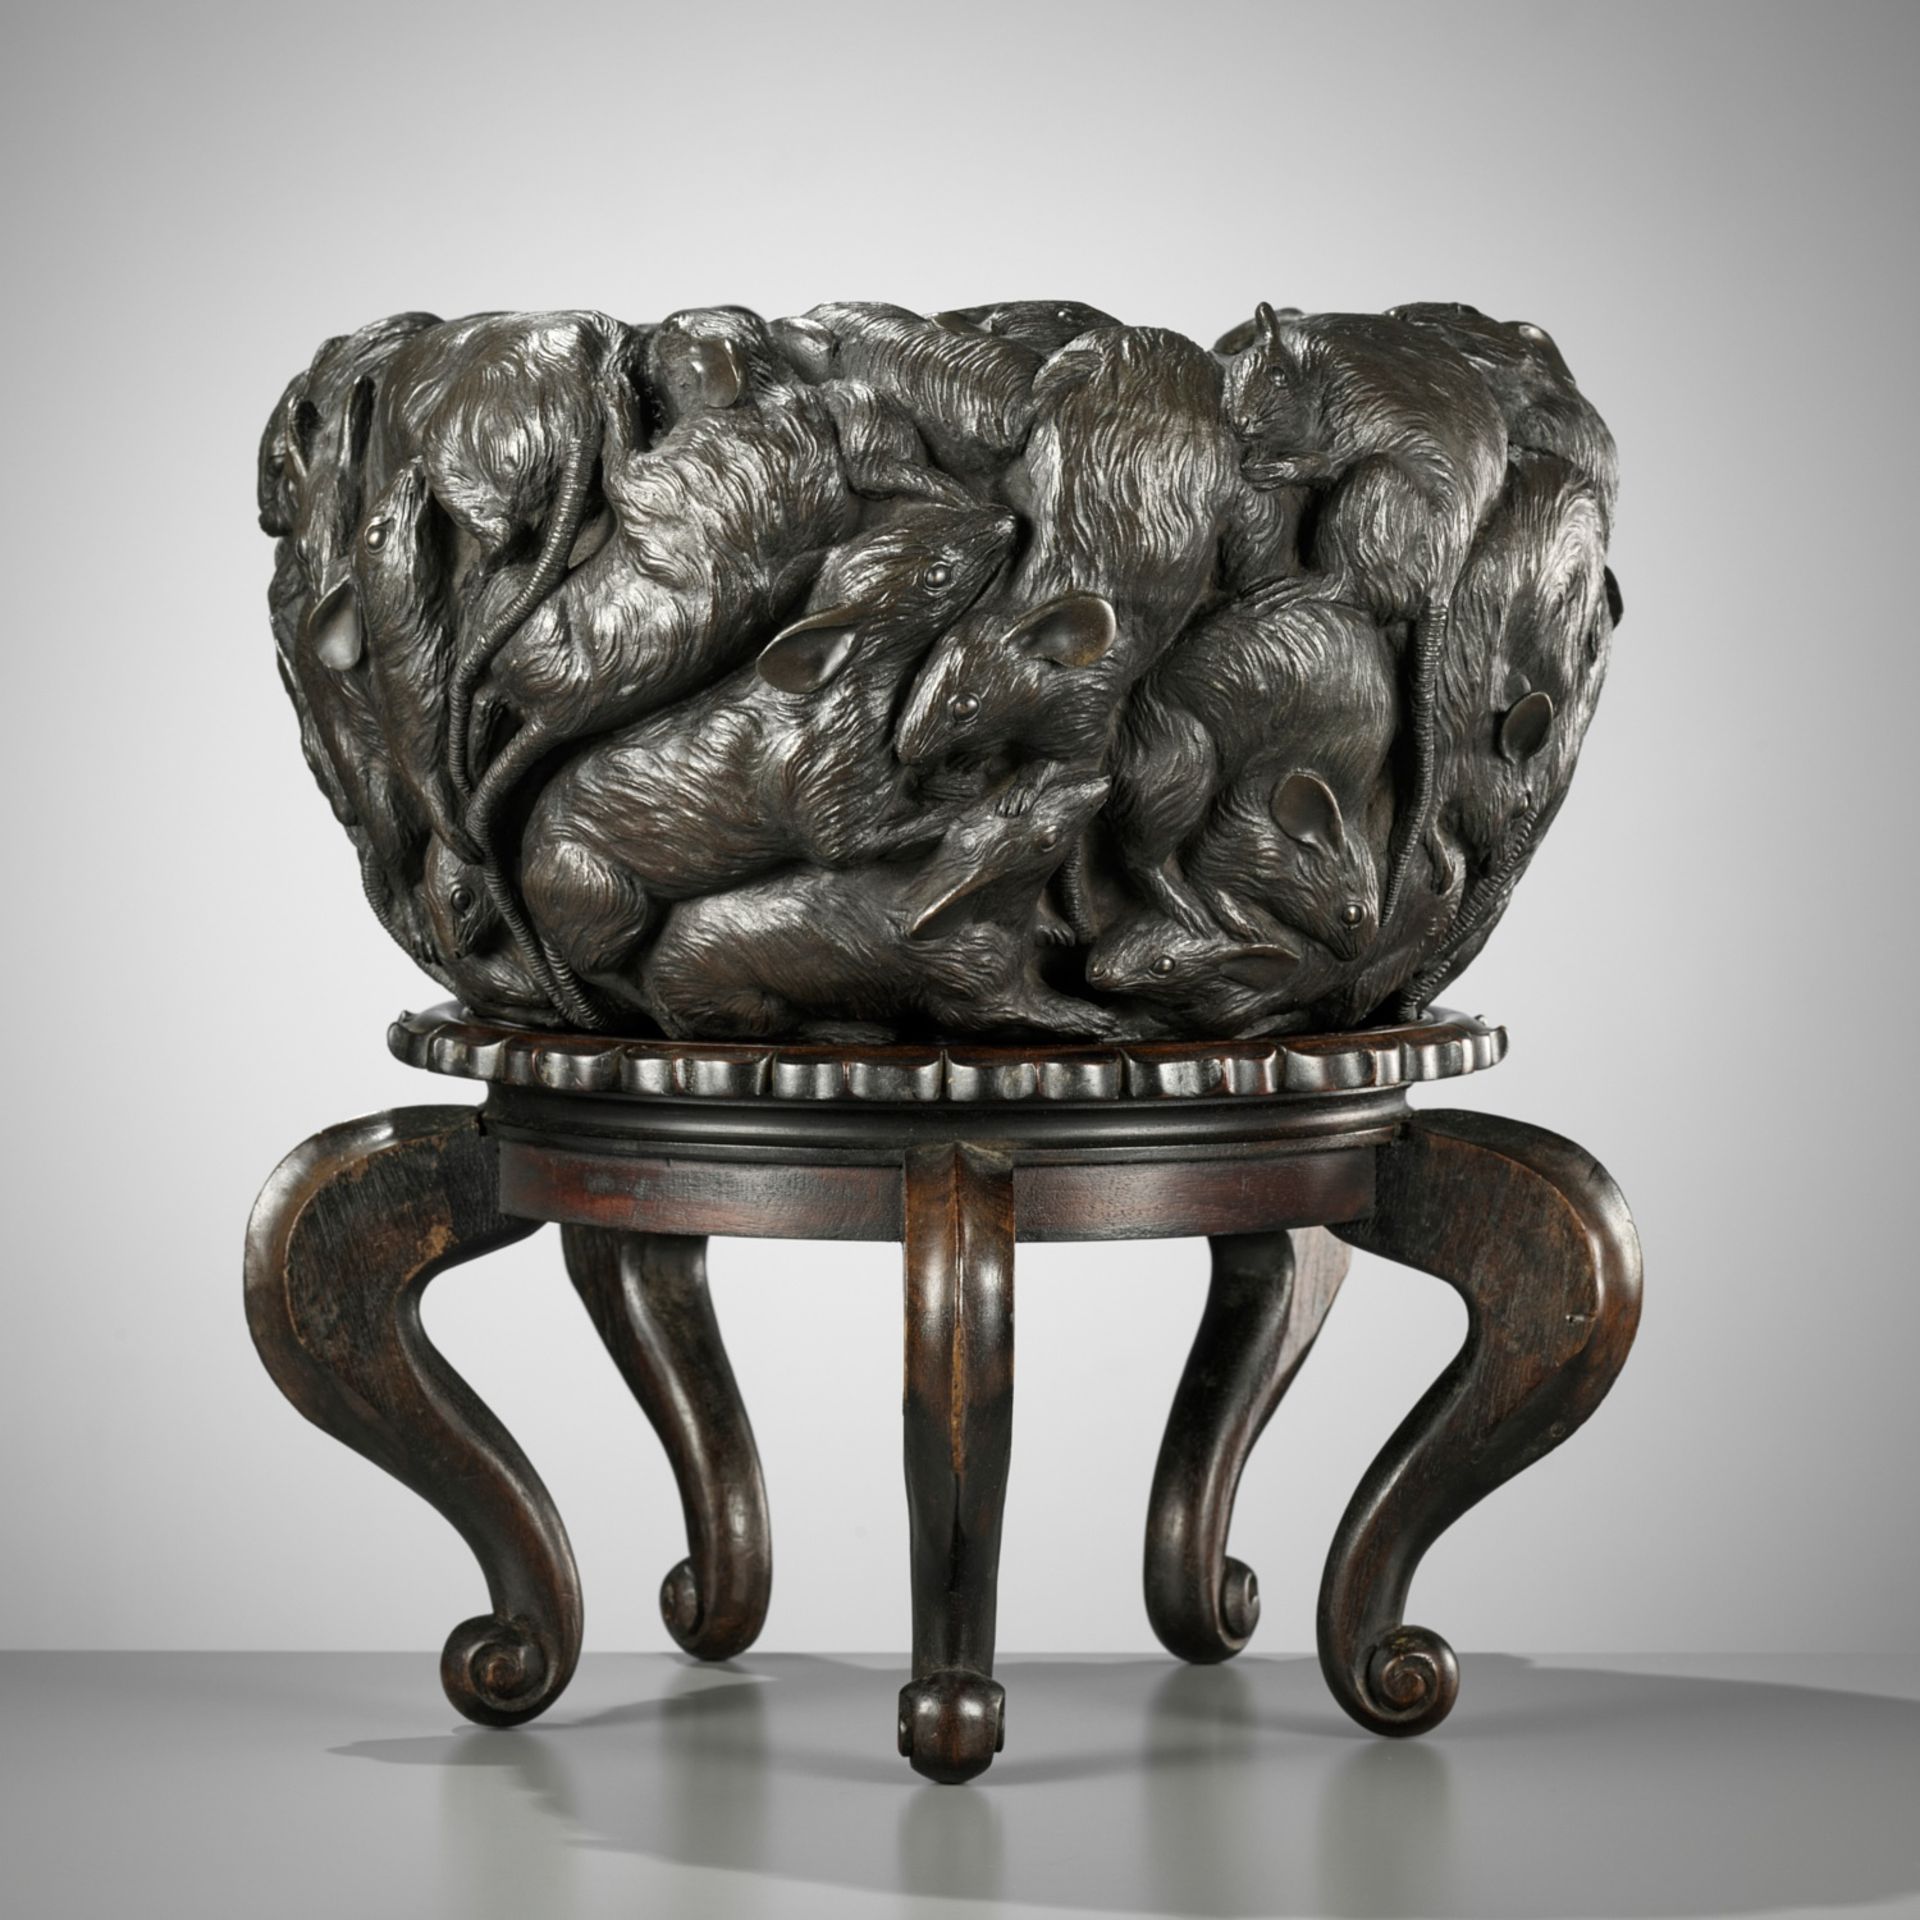 YOSHITANI: A MASSIVE AND HIGHLY UNUSUAL BRONZE JARDINIÃˆRE DEPICTING A NEST OF RATS